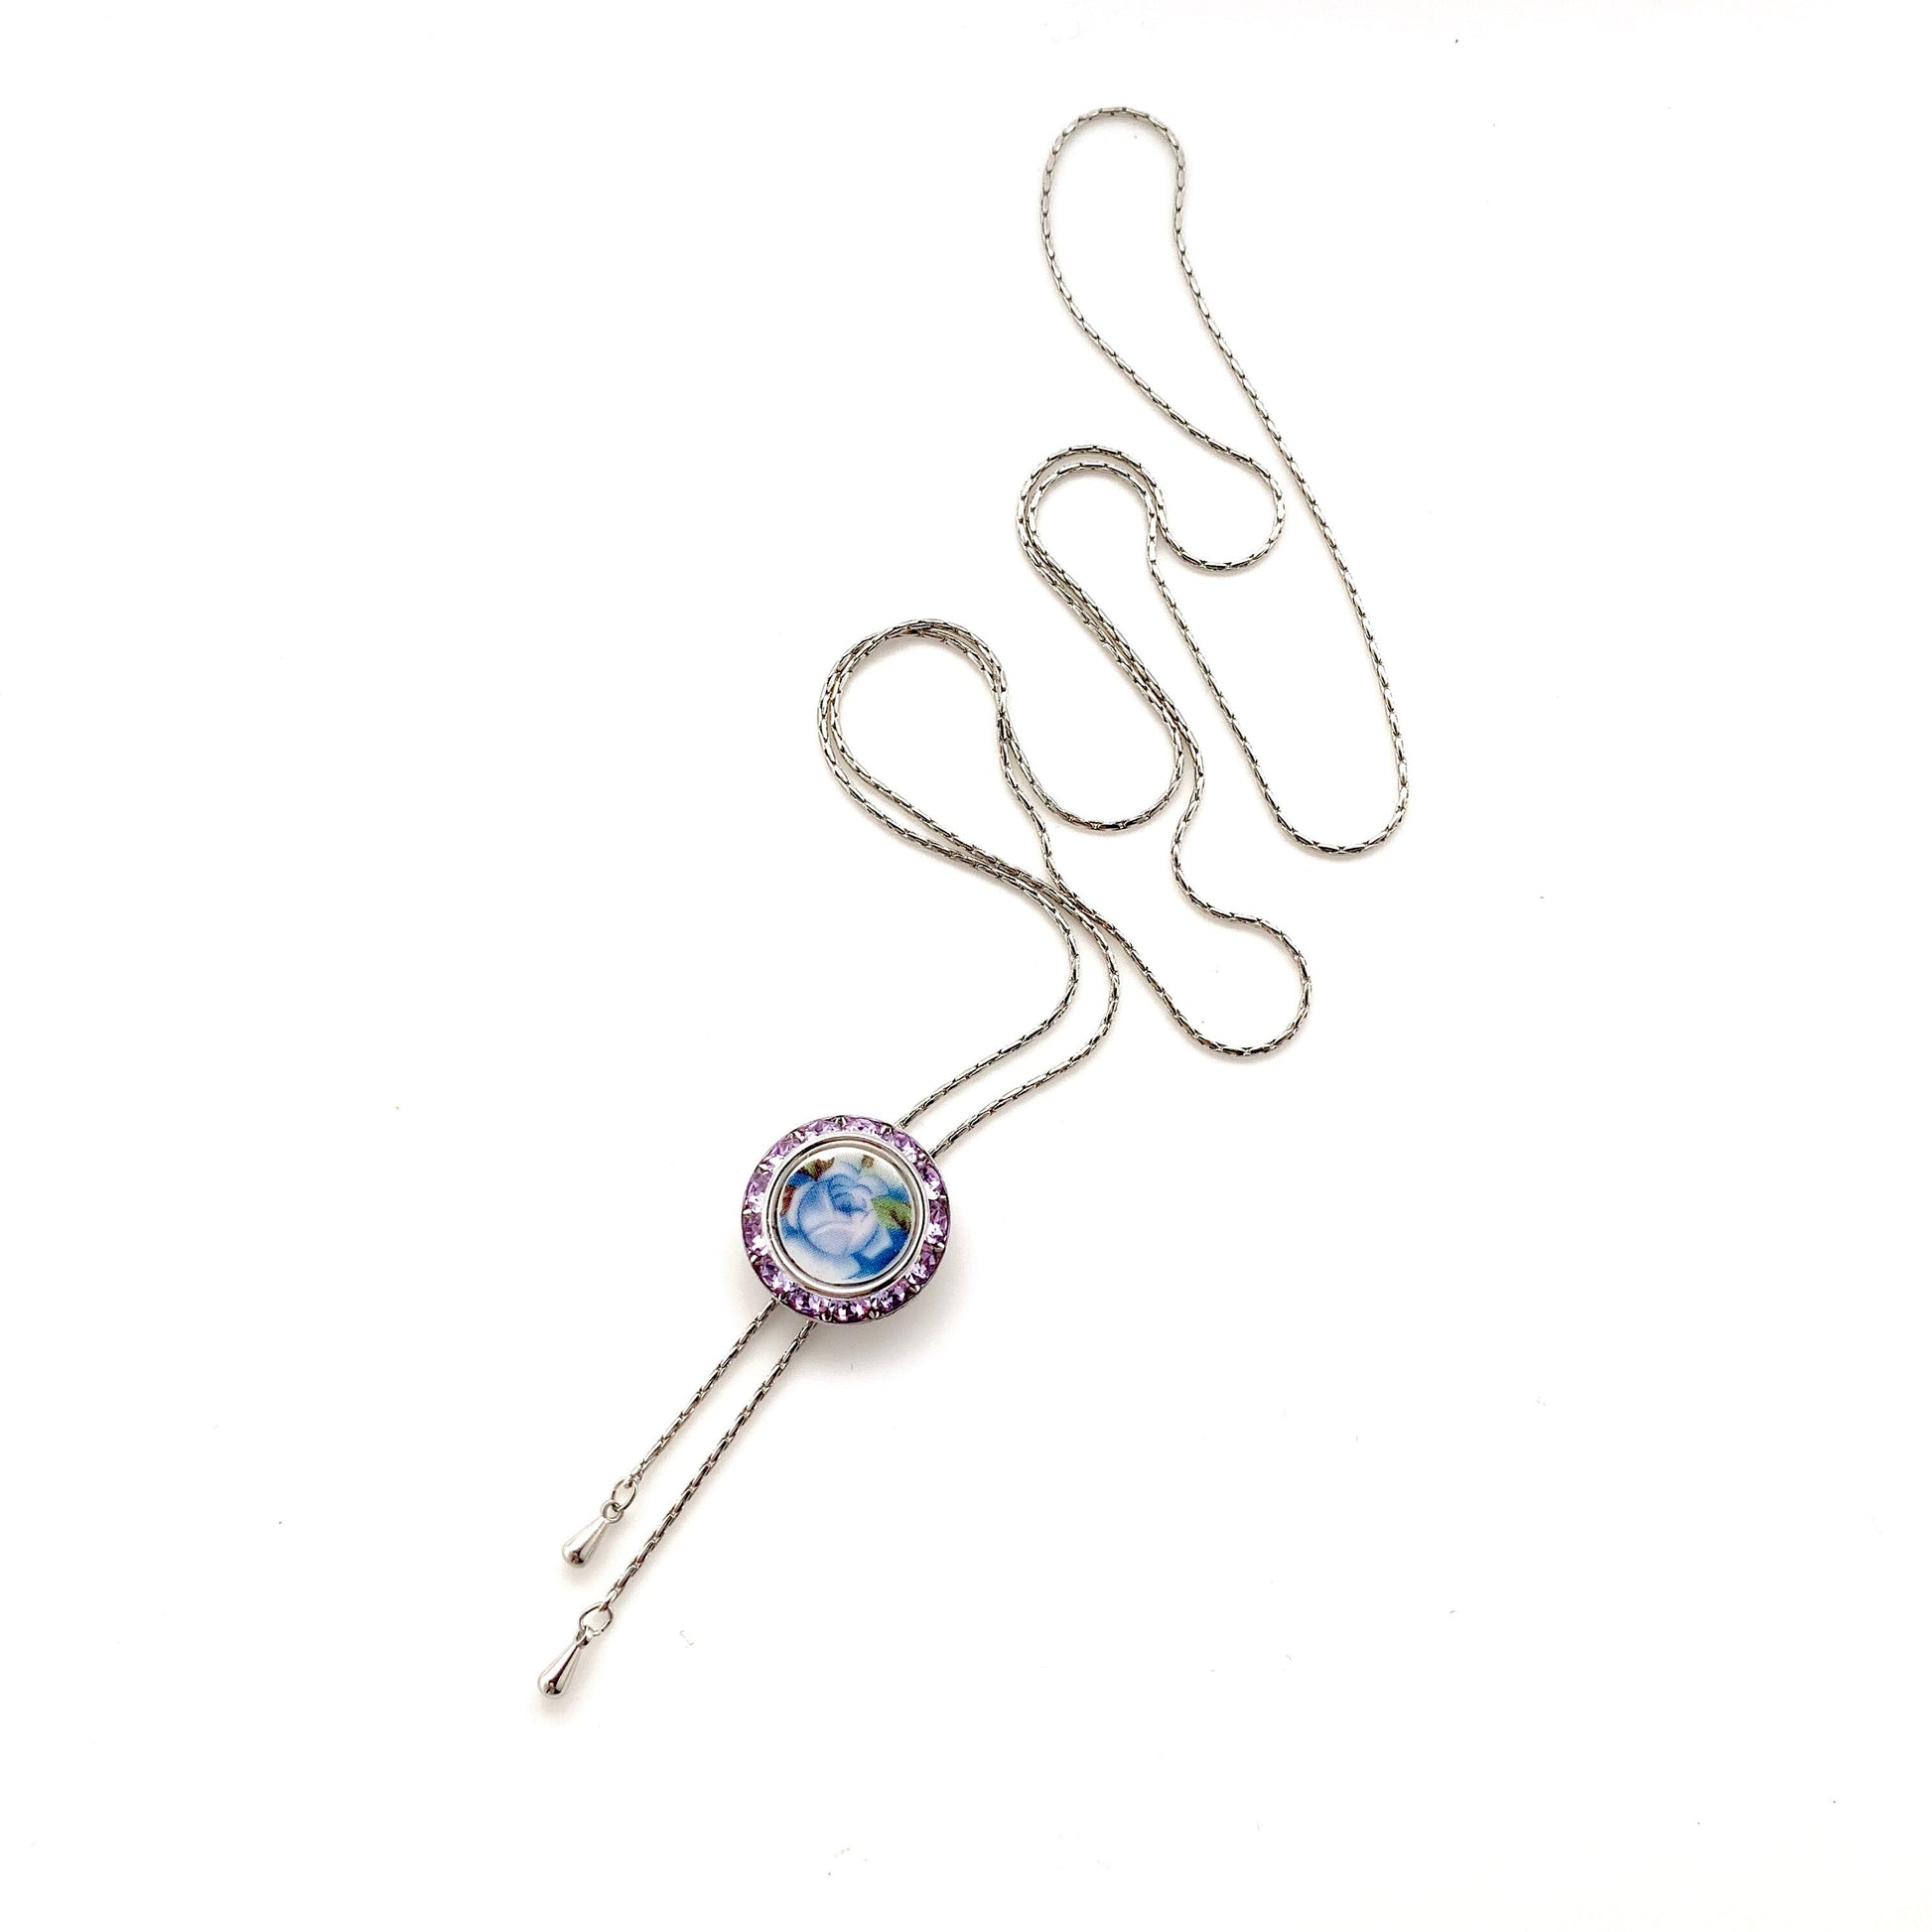 Moonlight Rose Bolo Tie for Women, Royal Albert Broken China Jewelry, Crystal Slide Lariat Necklace, Unique Gift for Women, Graduation Gifts